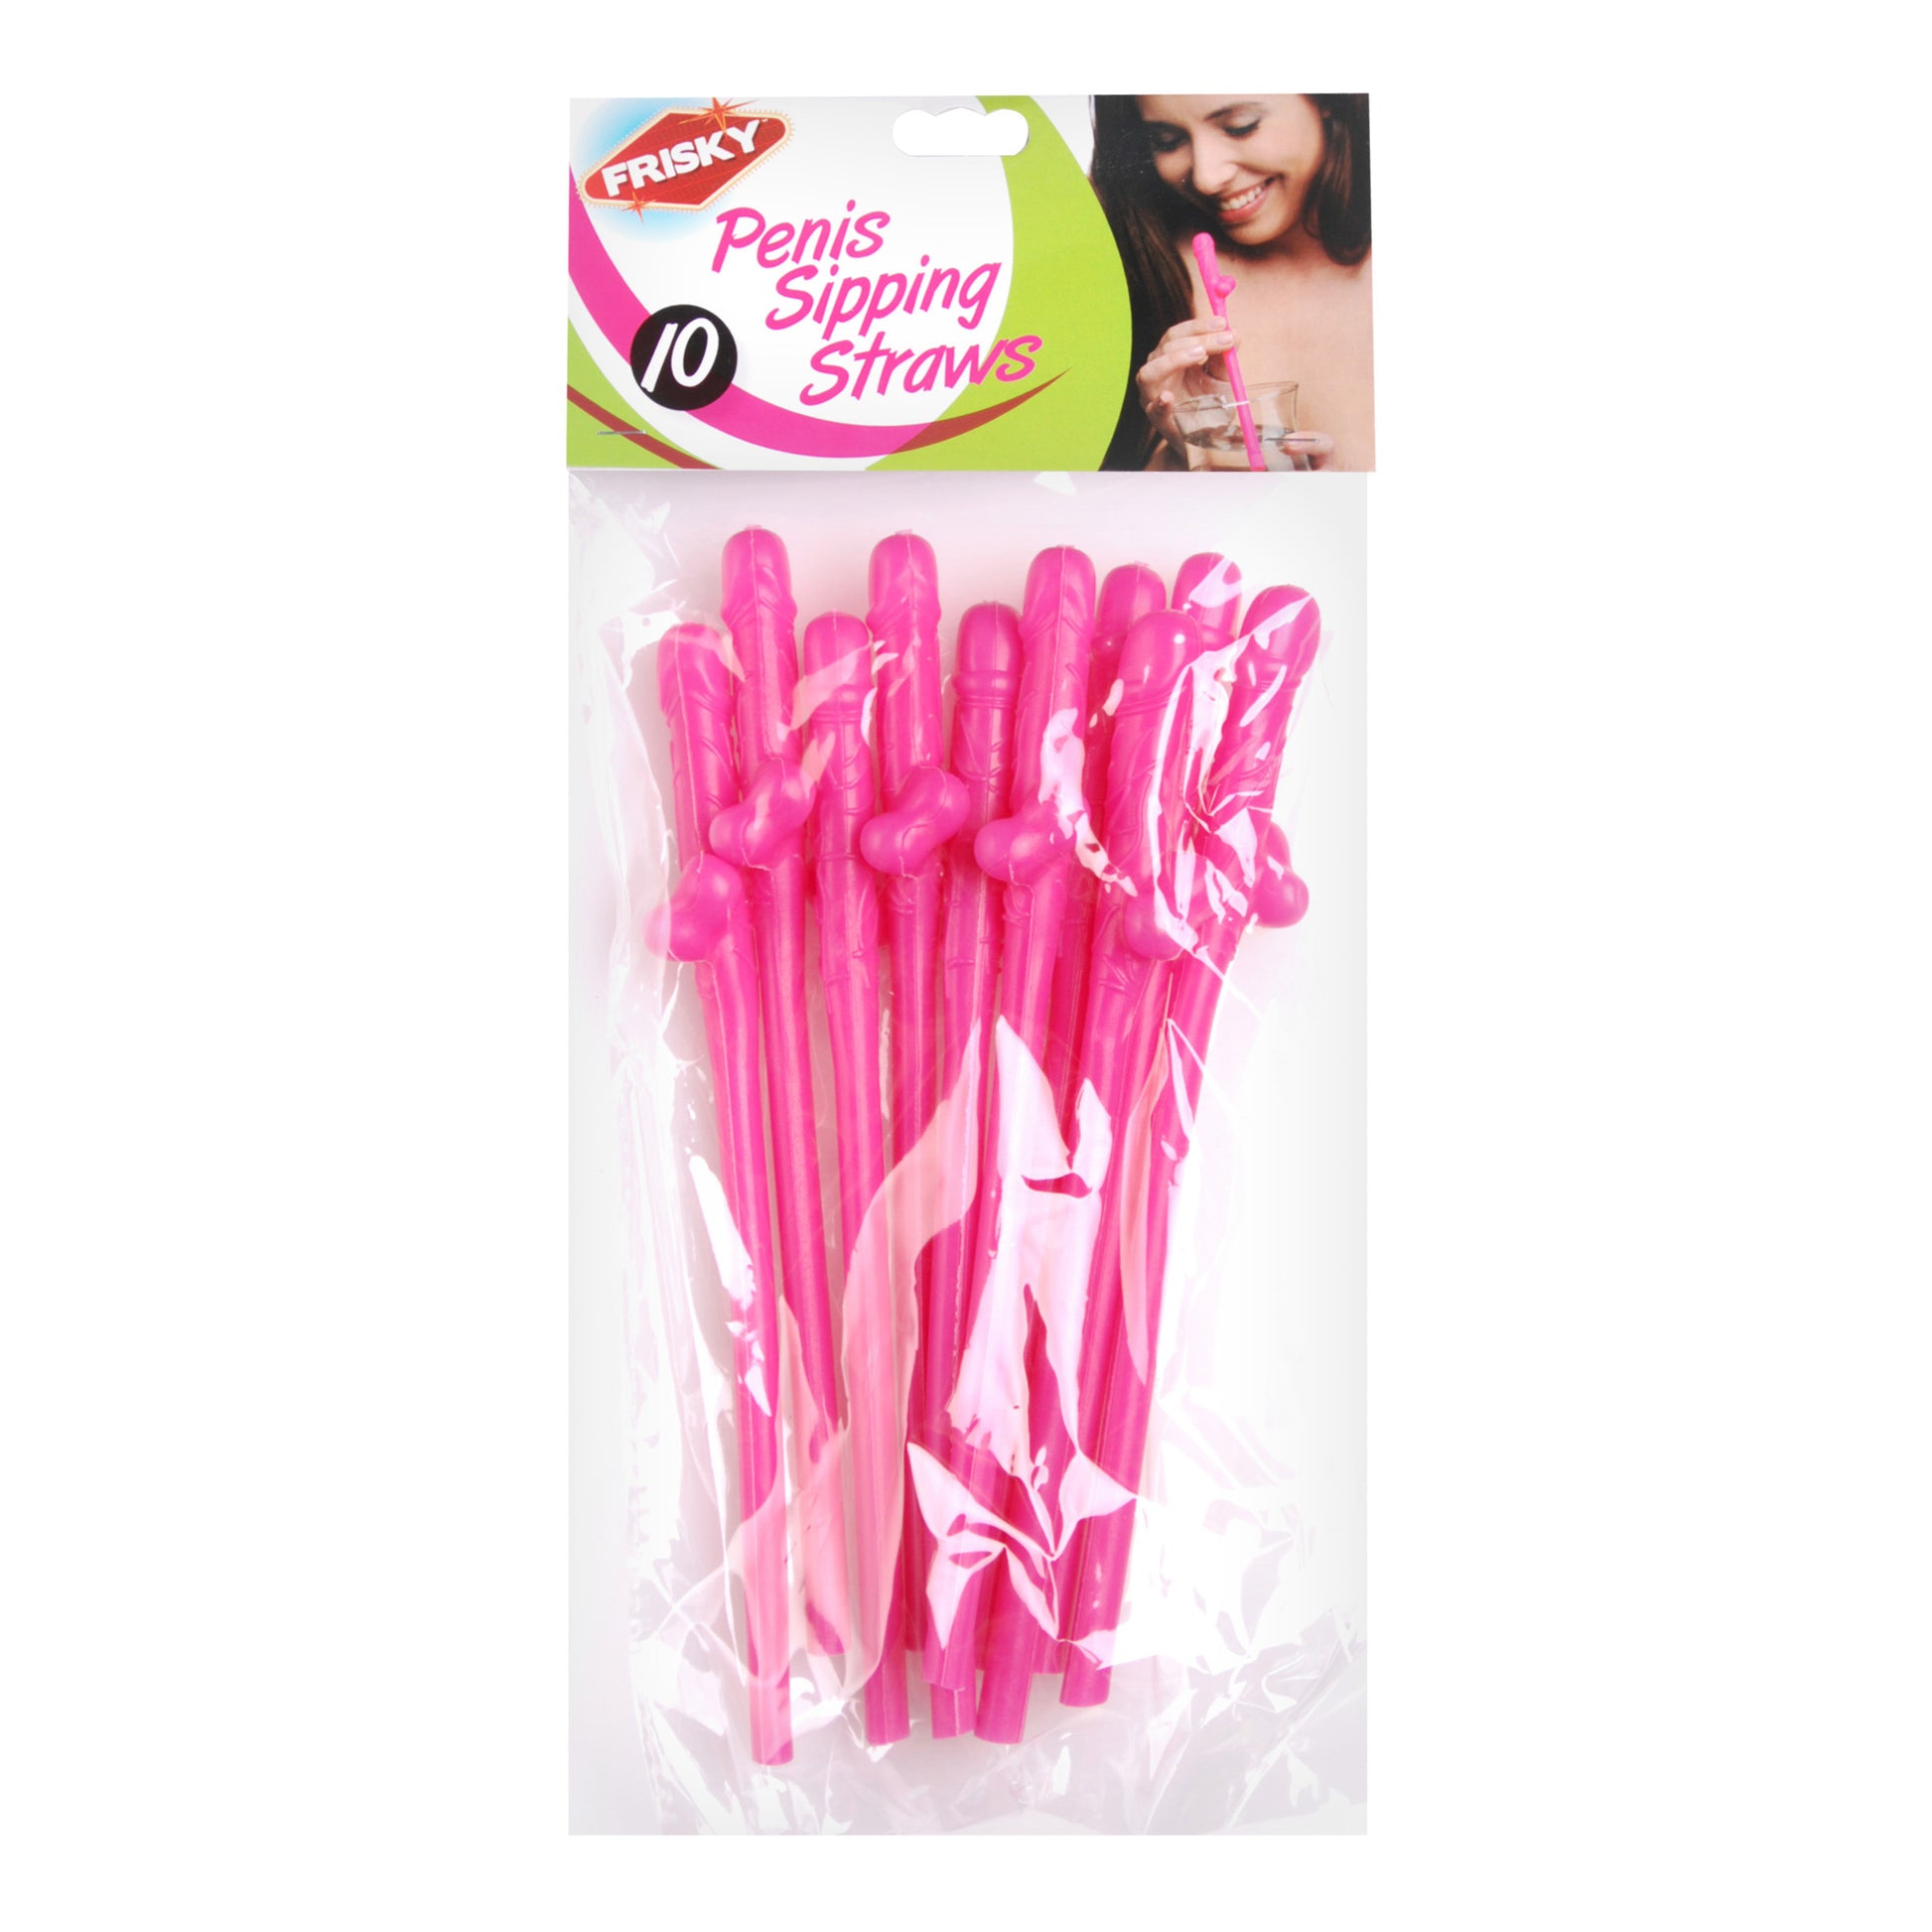 Penis Sipping Straws 10 Pack - Pink - UABDSM